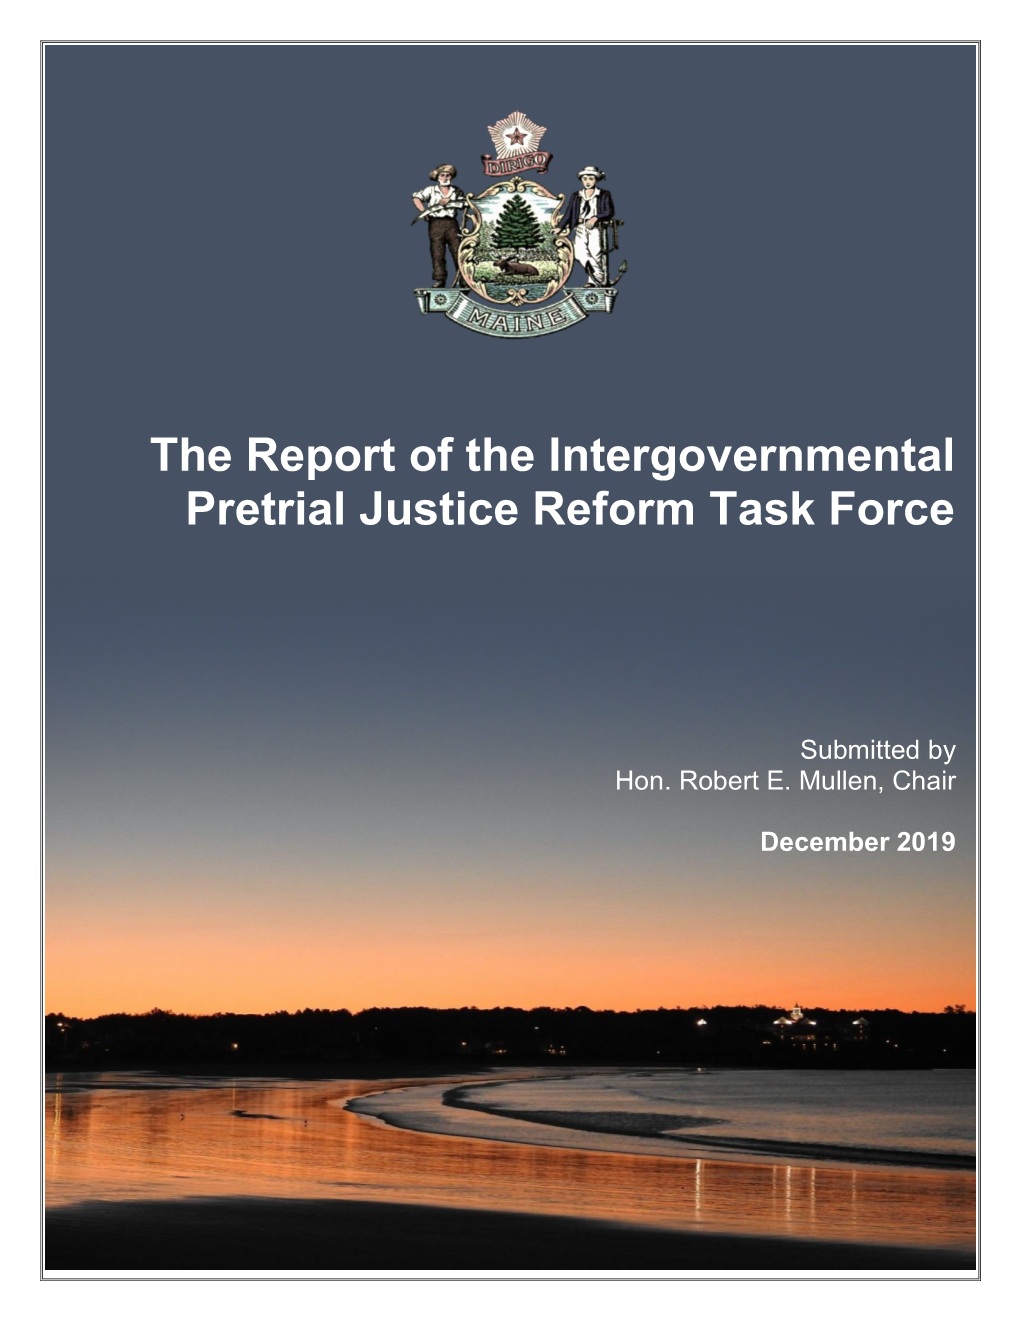 The Report of the Intergovernmental Pretrial Justice Reform Task Force